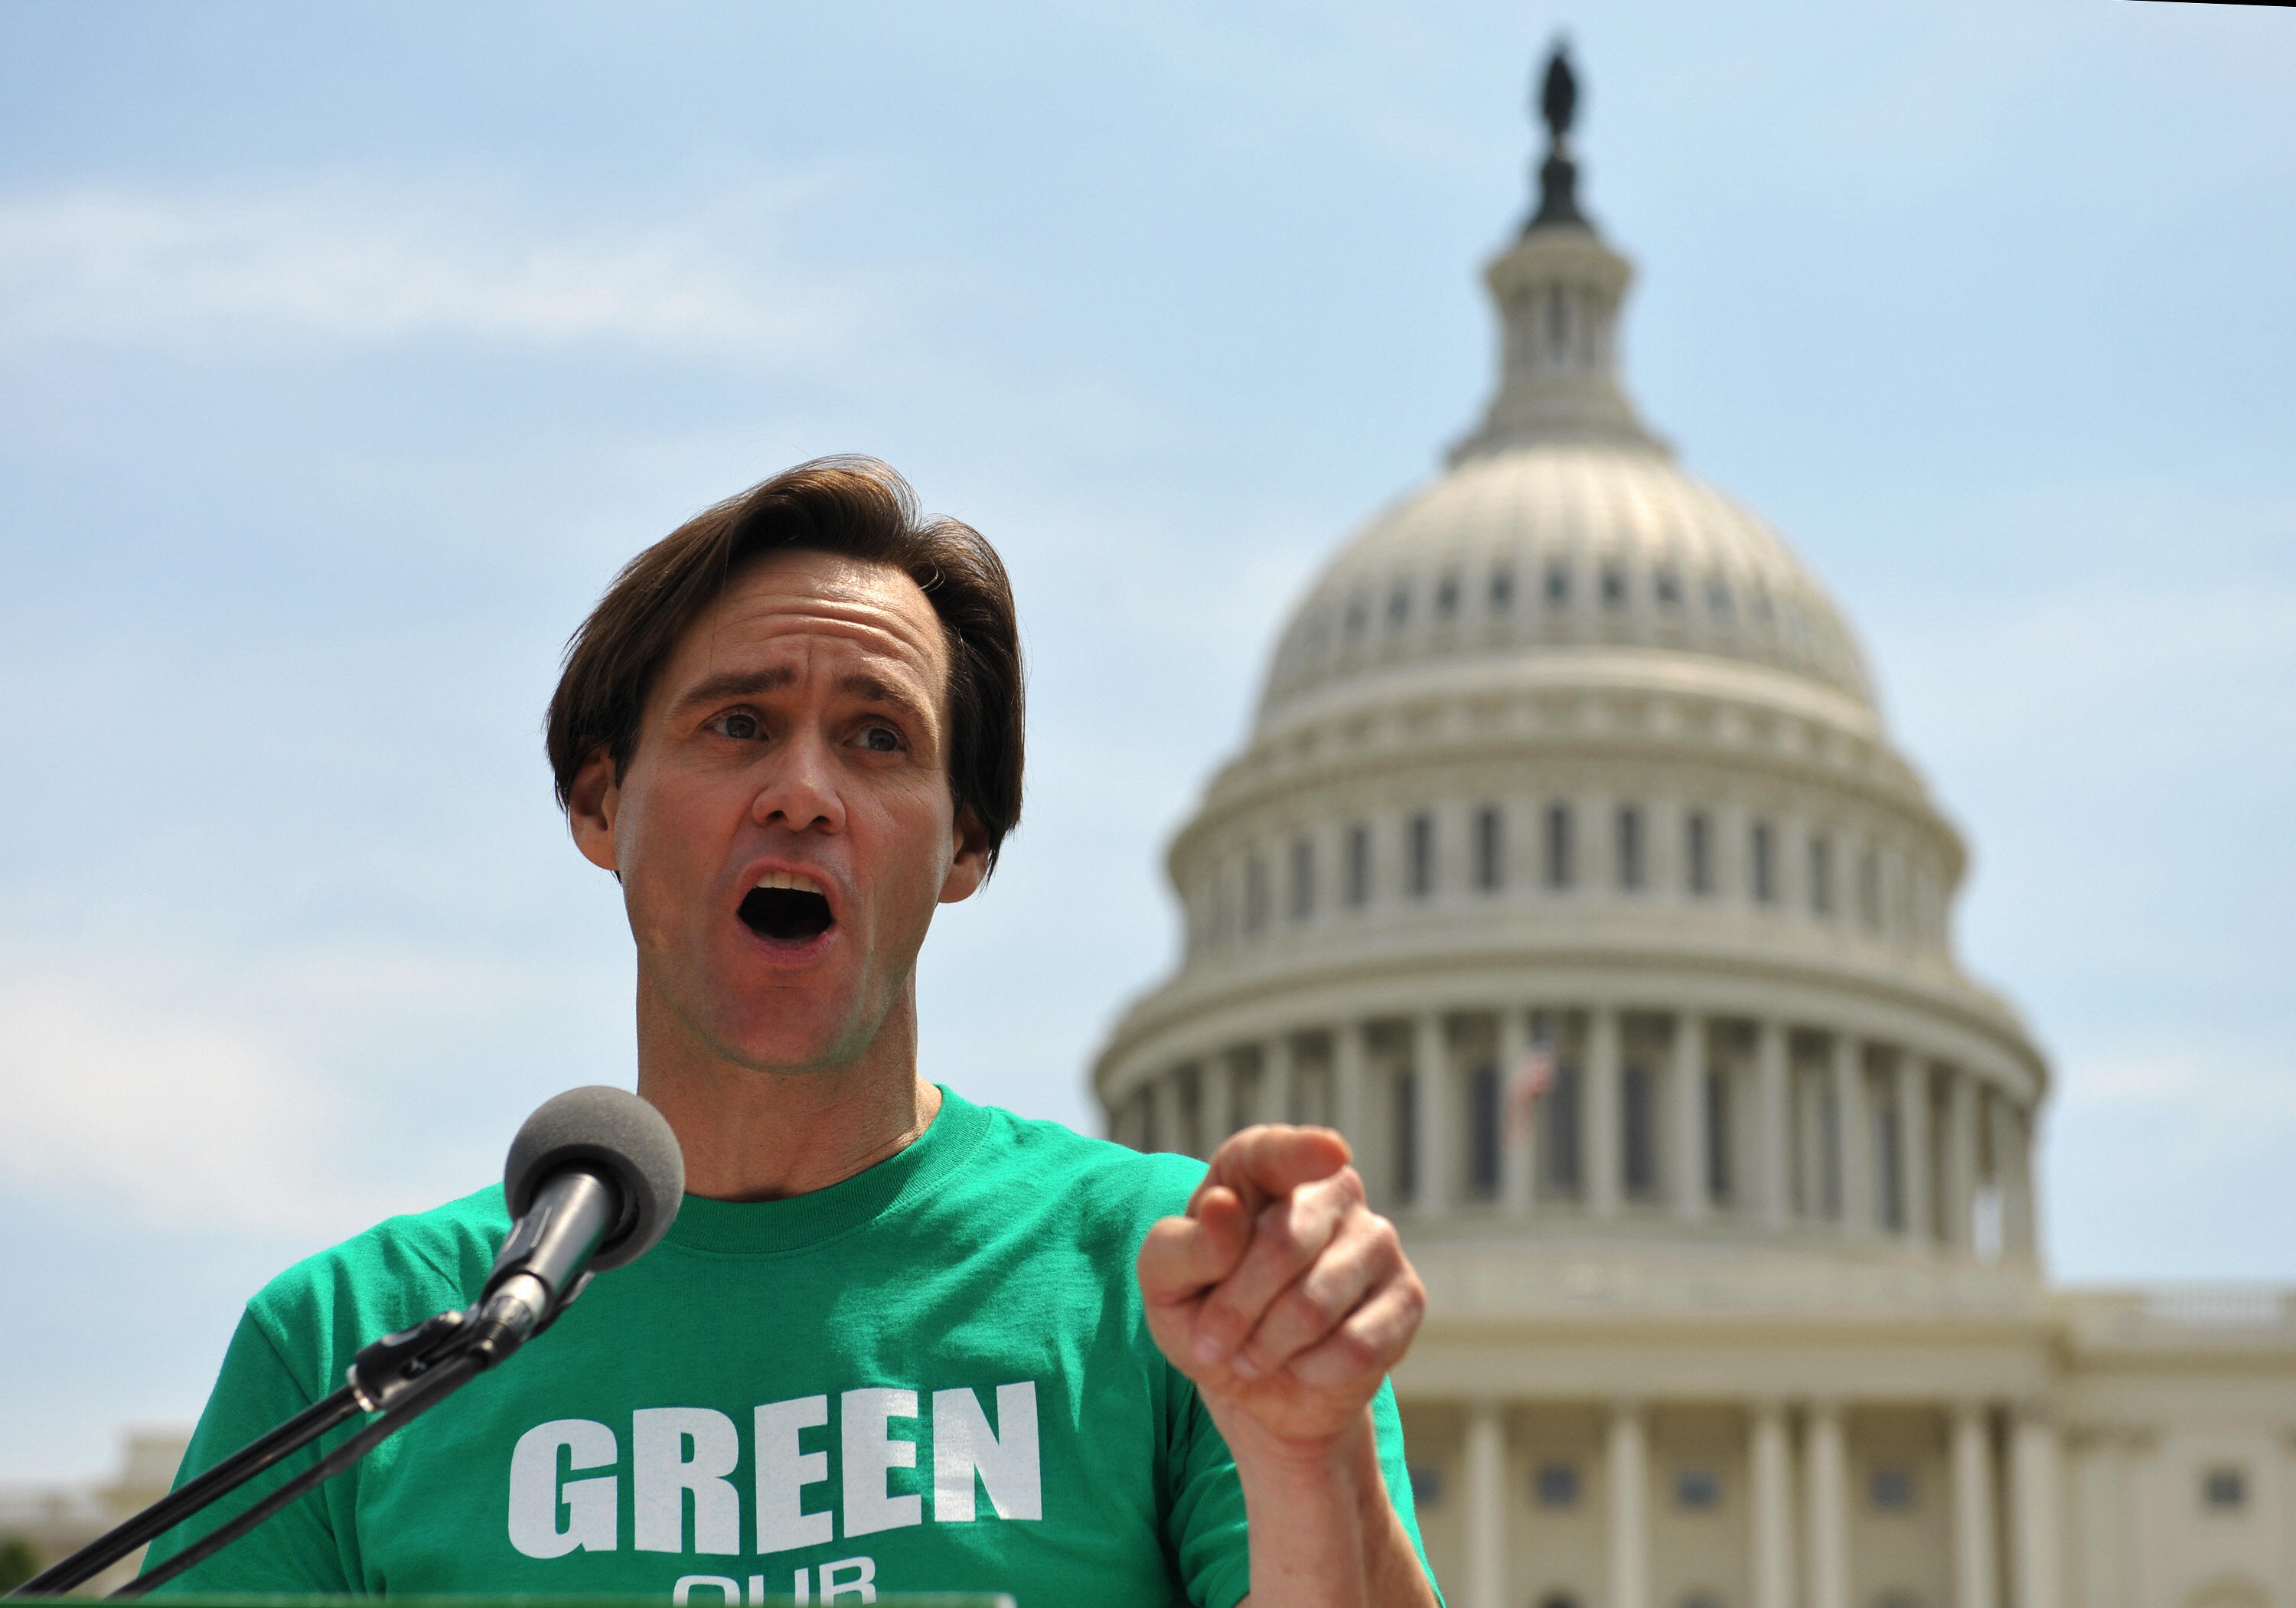 81405695-actor-jim-carrey-speaks-during-a-rally-in-front-of-the.jpg